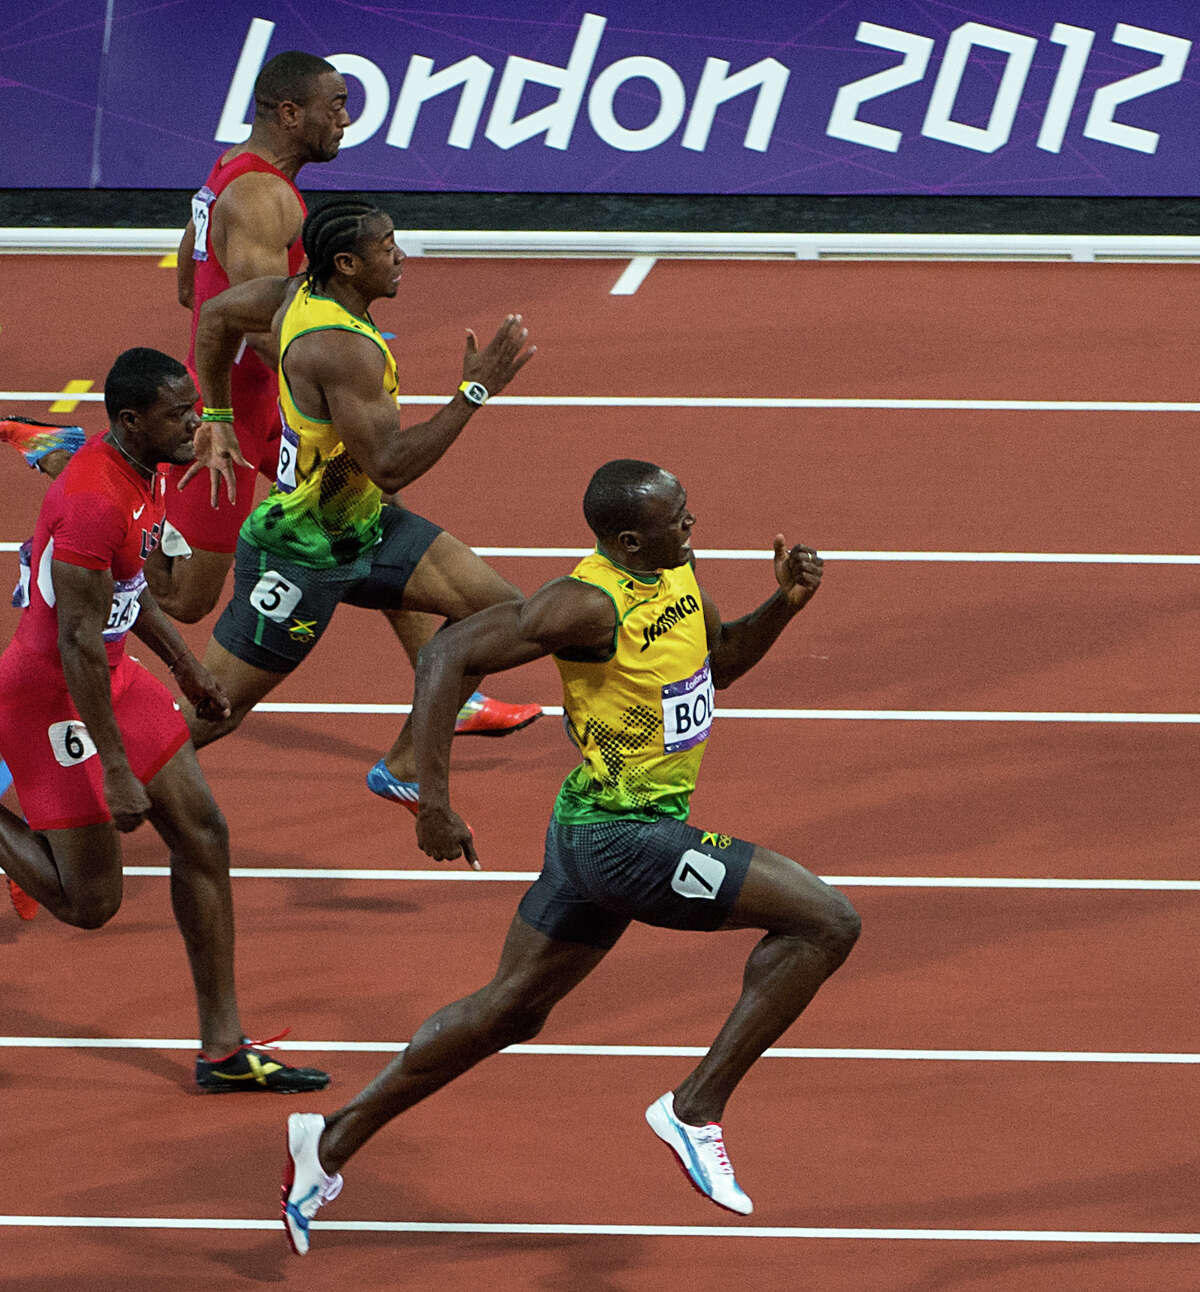 Usain Bolt of Jamaica, leads Justin Gatlin of the USA, Yohan Blake of Jamaica, and Tyson Gay of the USA down the track during the men's 100-meter final at the 2012 London Olympics on Sunday, Aug. 5, 2012. Bolt won gold in the event, with Blake second and Gatlin taking third. ( Smiley N. Pool / Houston Chronicle )